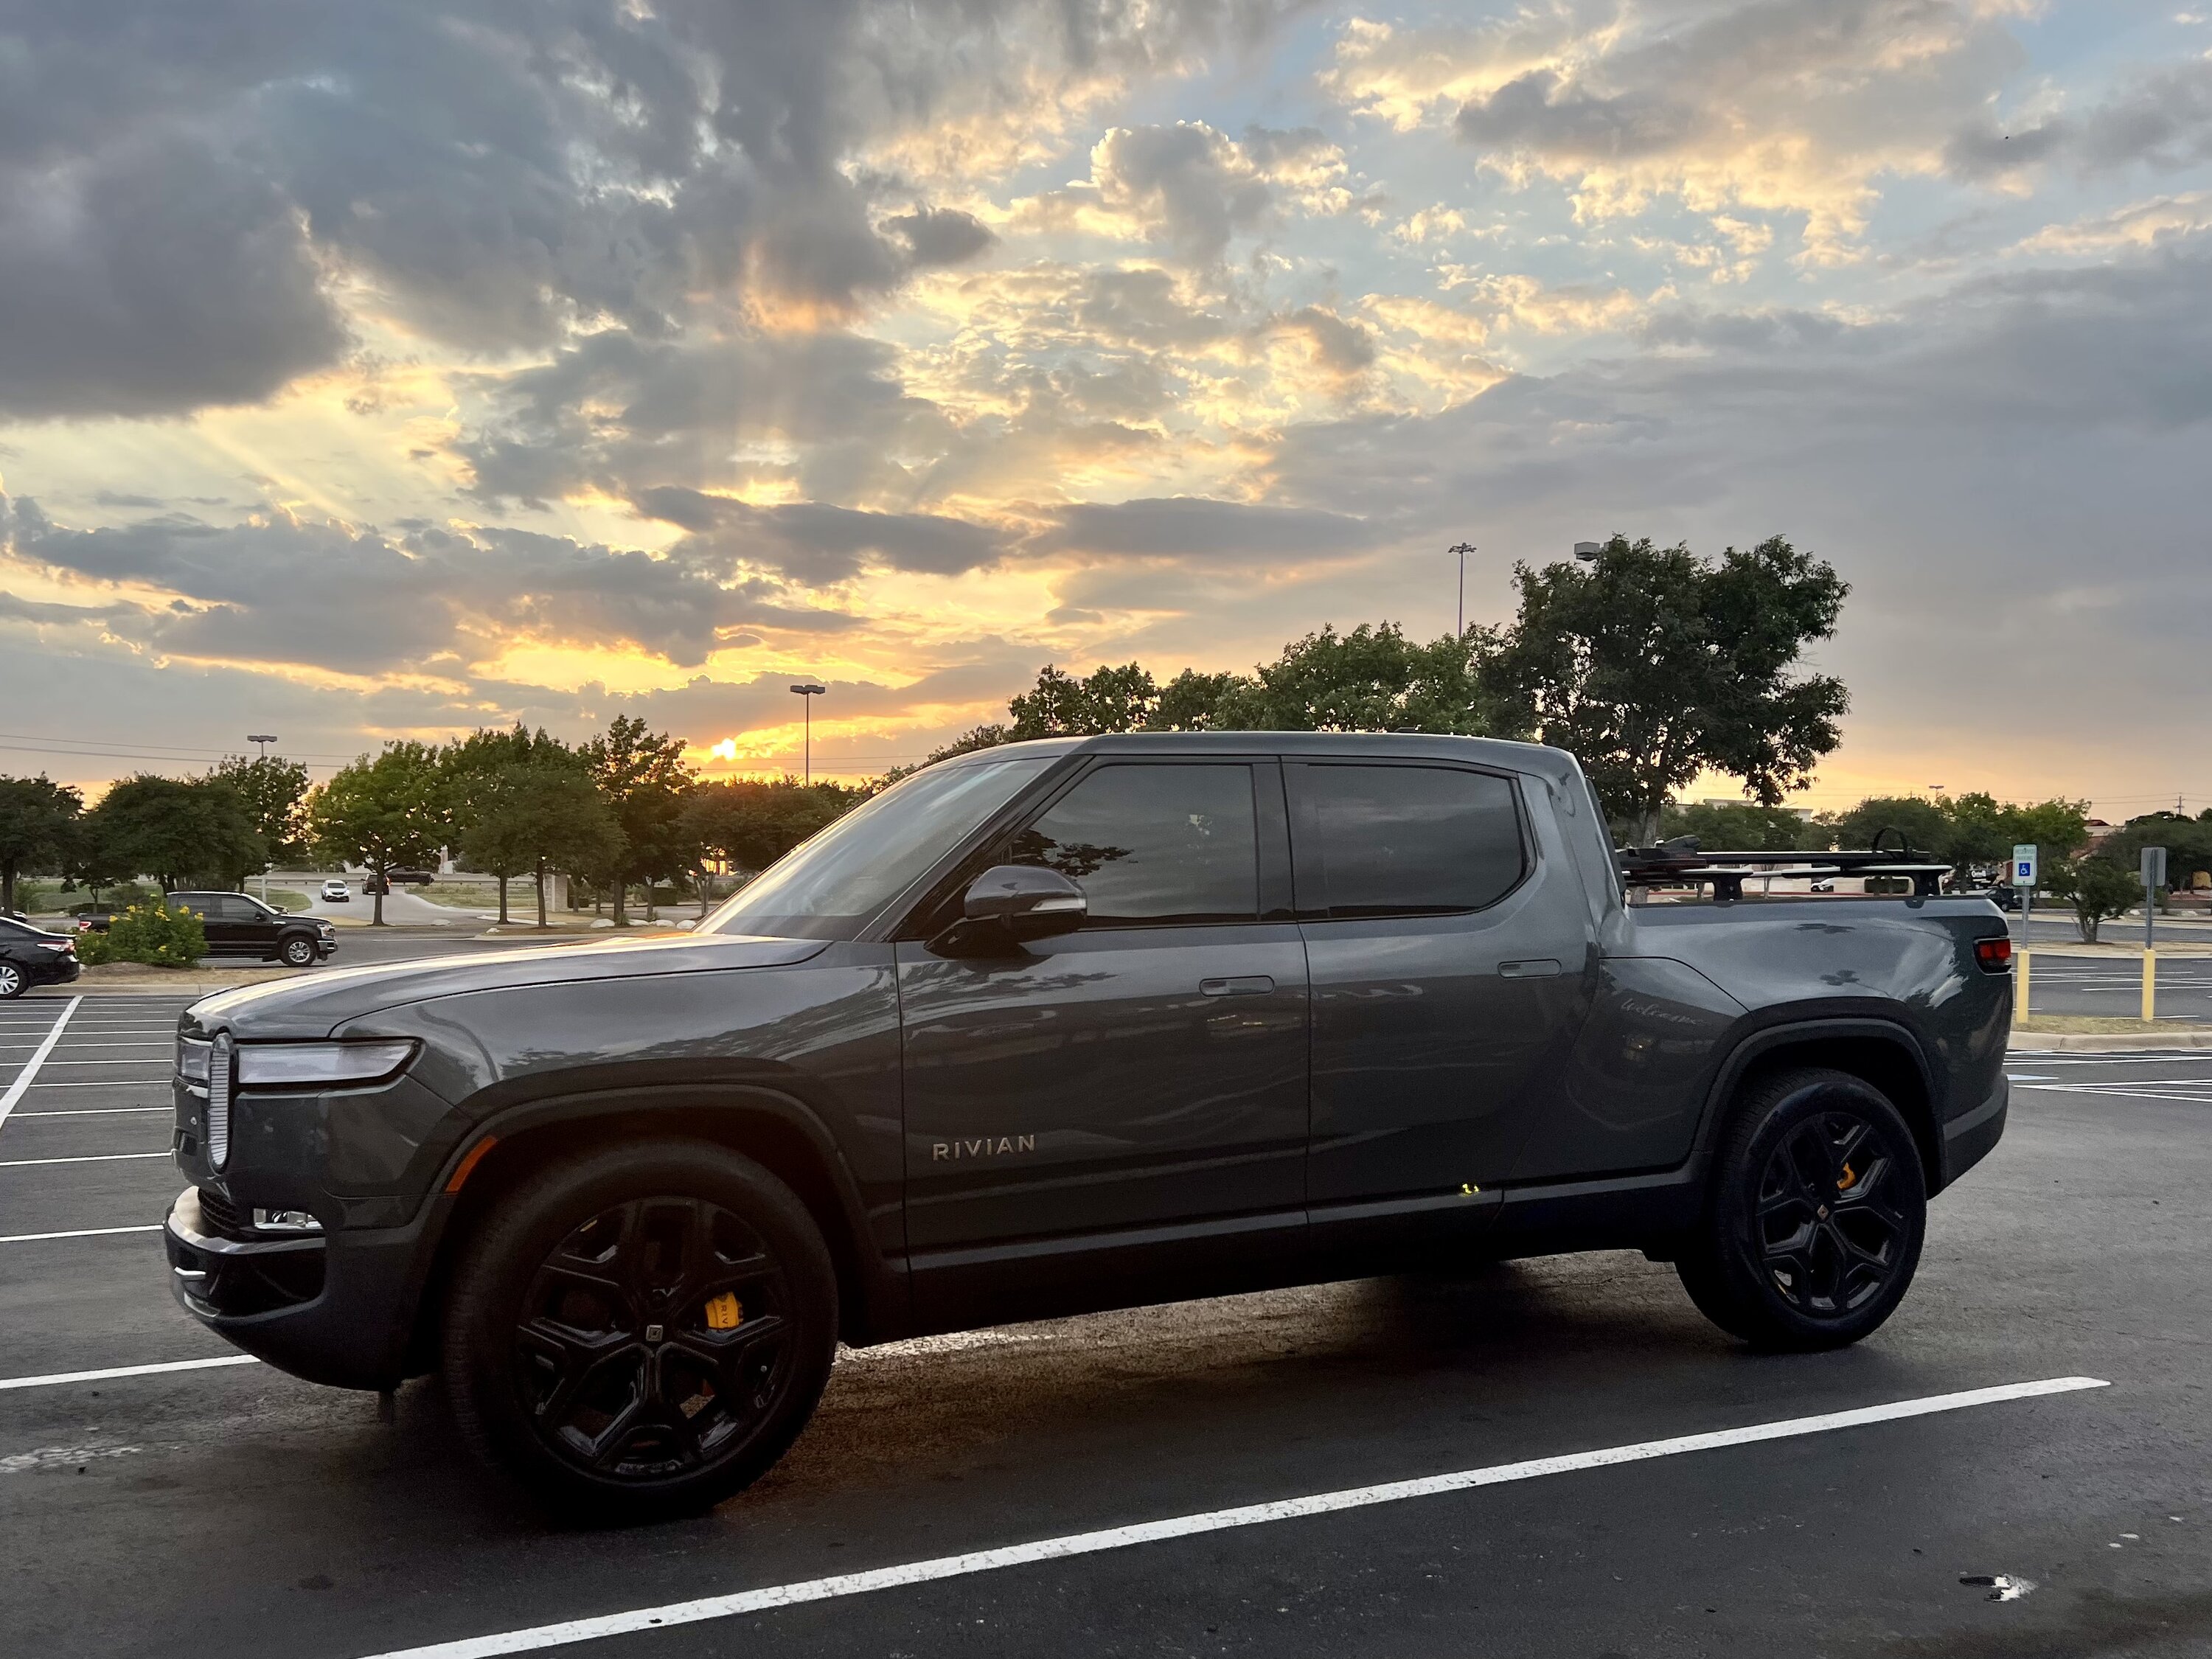 Rivian R1T R1S 📸 Post Your Best Photo Here For Year-End Rivian Mosaic! AB6534AD-DF66-43E9-BEEF-B11576A6E641